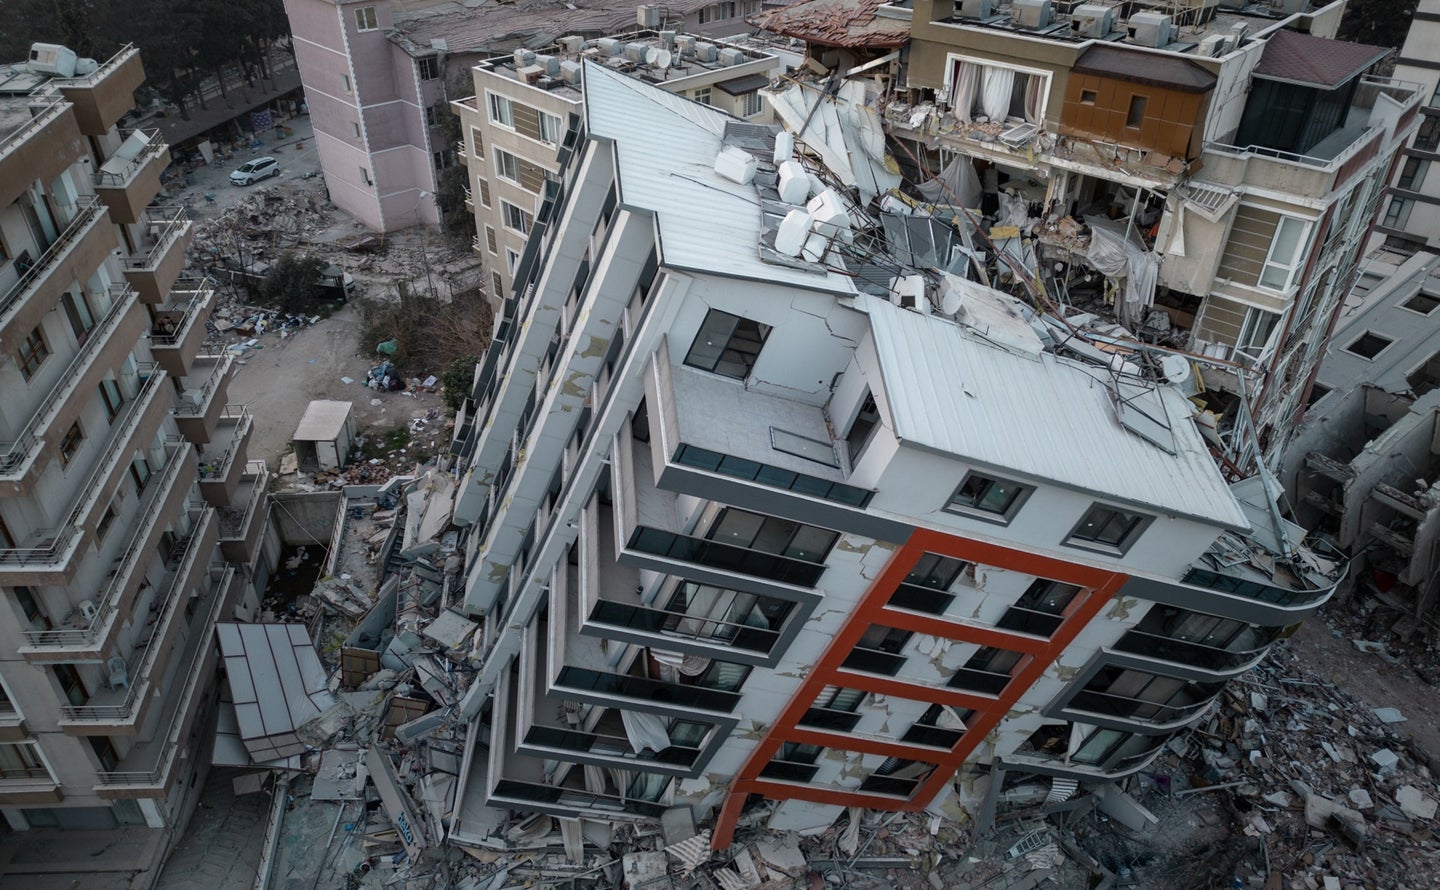 Complete collapse of tall apartment building after Turkey Syria earthquake. Seen from aerial view.